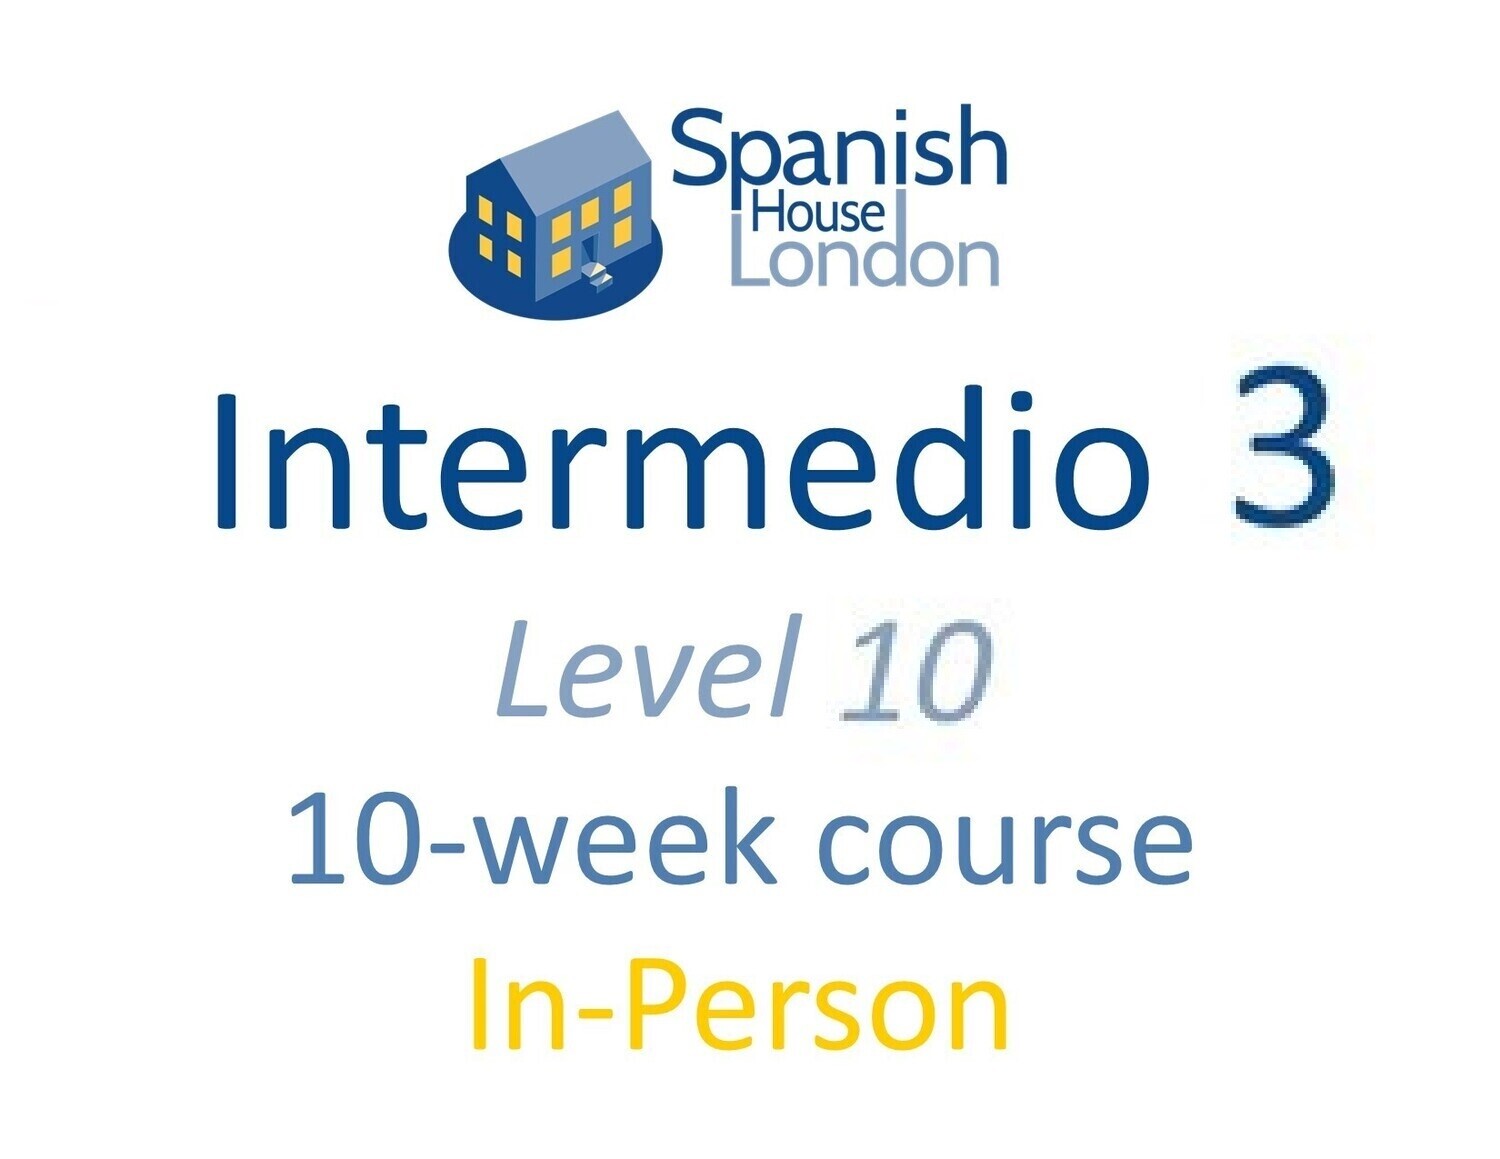 Intermedio 3 Course starting on 29th April at 6pm in Clapham North